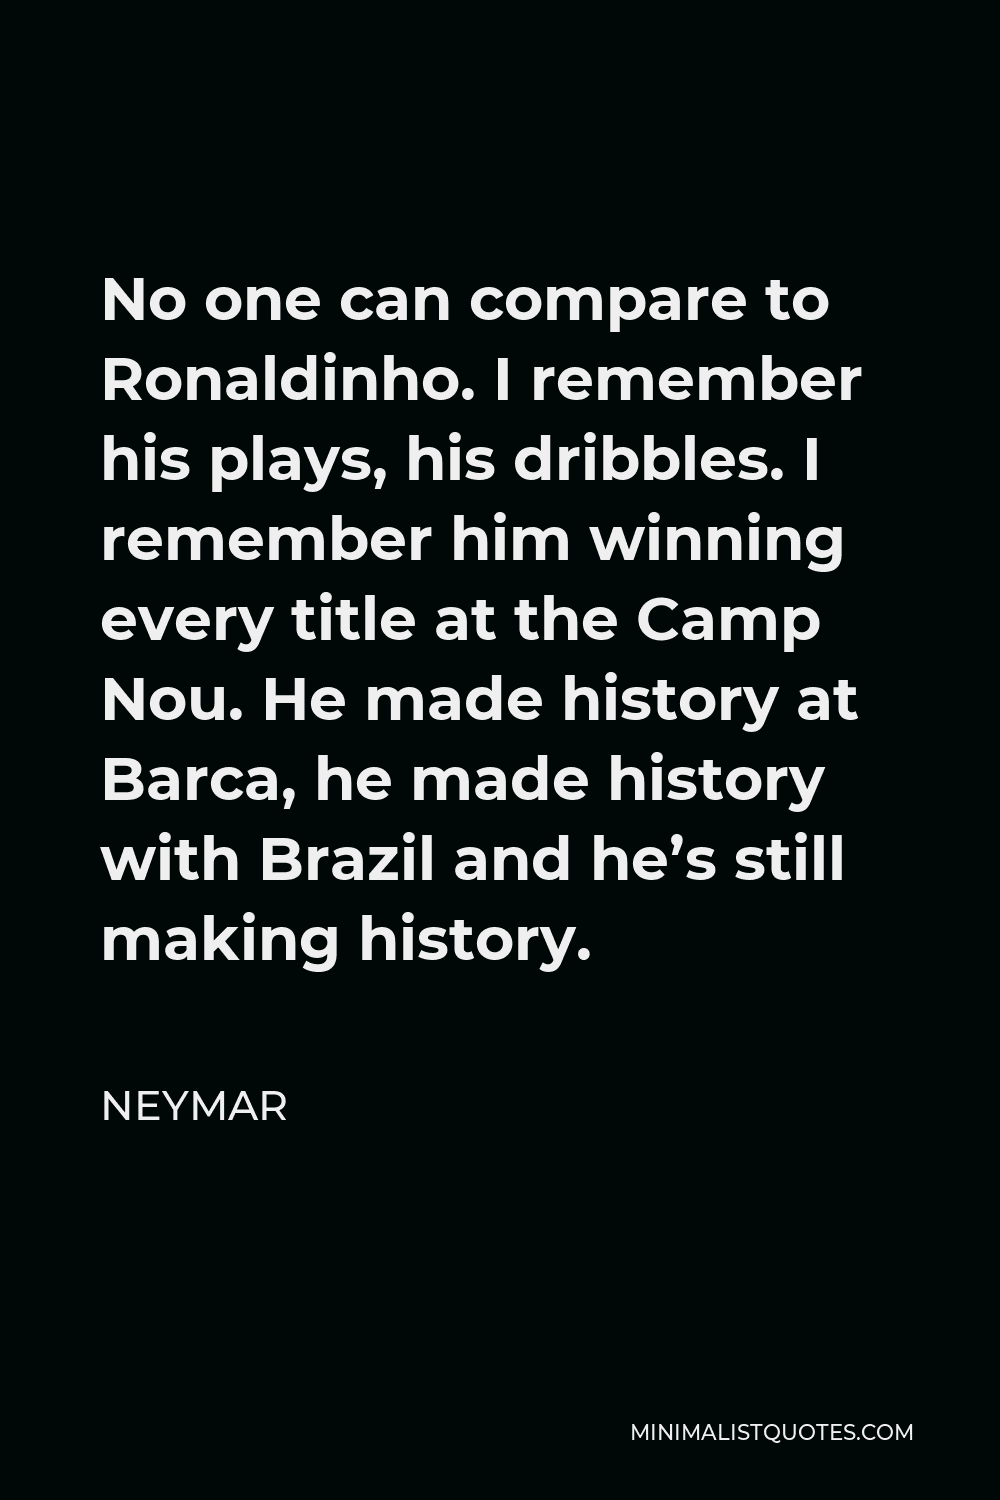 Neymar Quote - No one can compare to Ronaldinho. I remember his plays, his dribbles. I remember him winning every title at the Camp Nou. He made history at Barca, he made history with Brazil and he’s still making history.